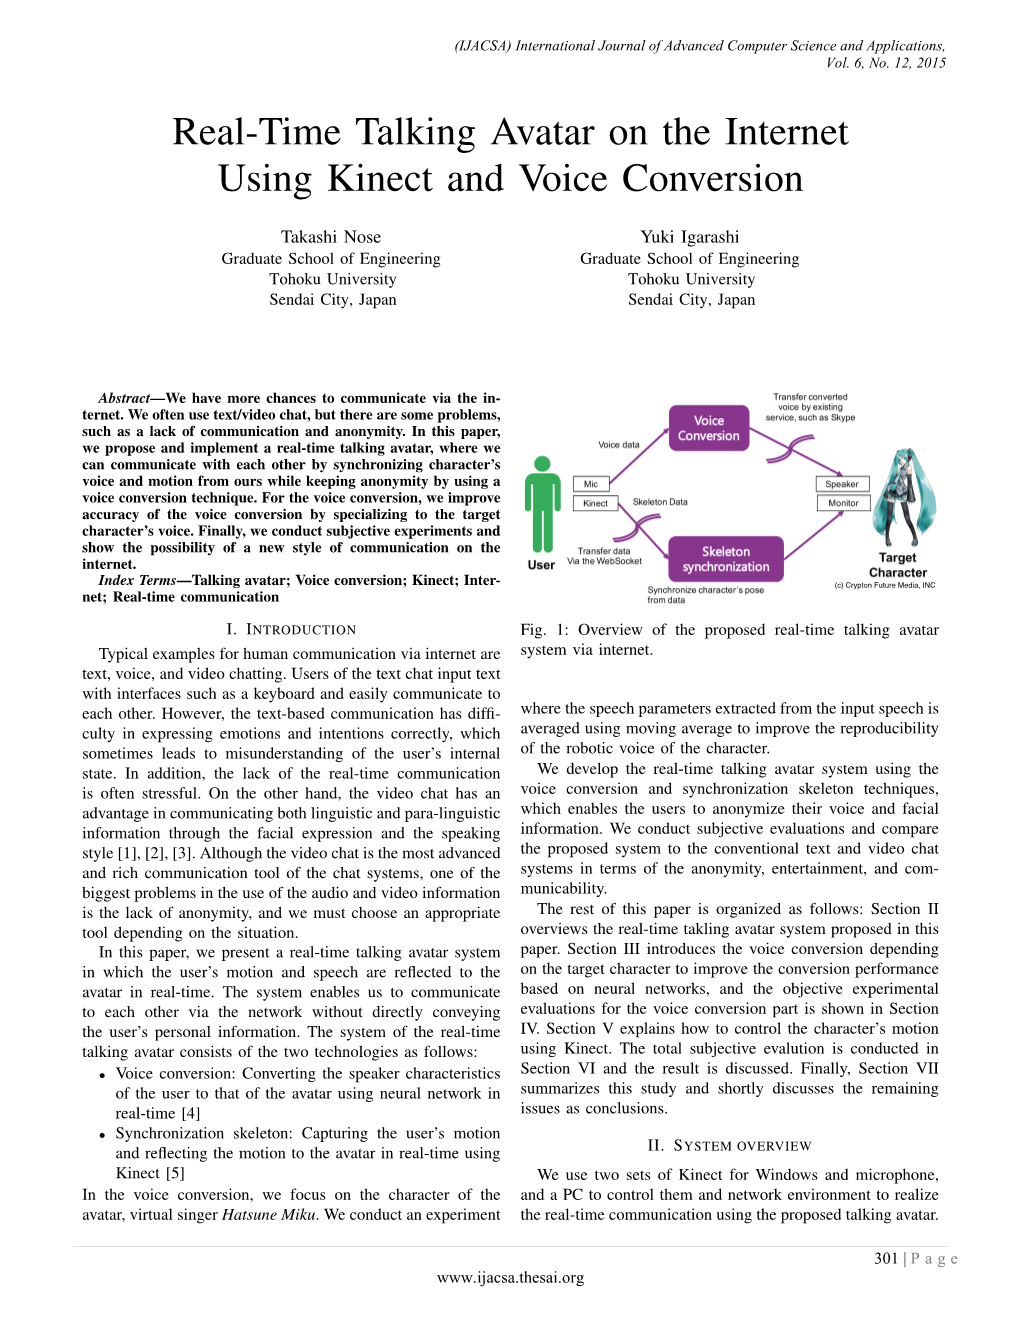 Real-Time Talking Avatar on the Internet Using Kinect and Voice Conversion